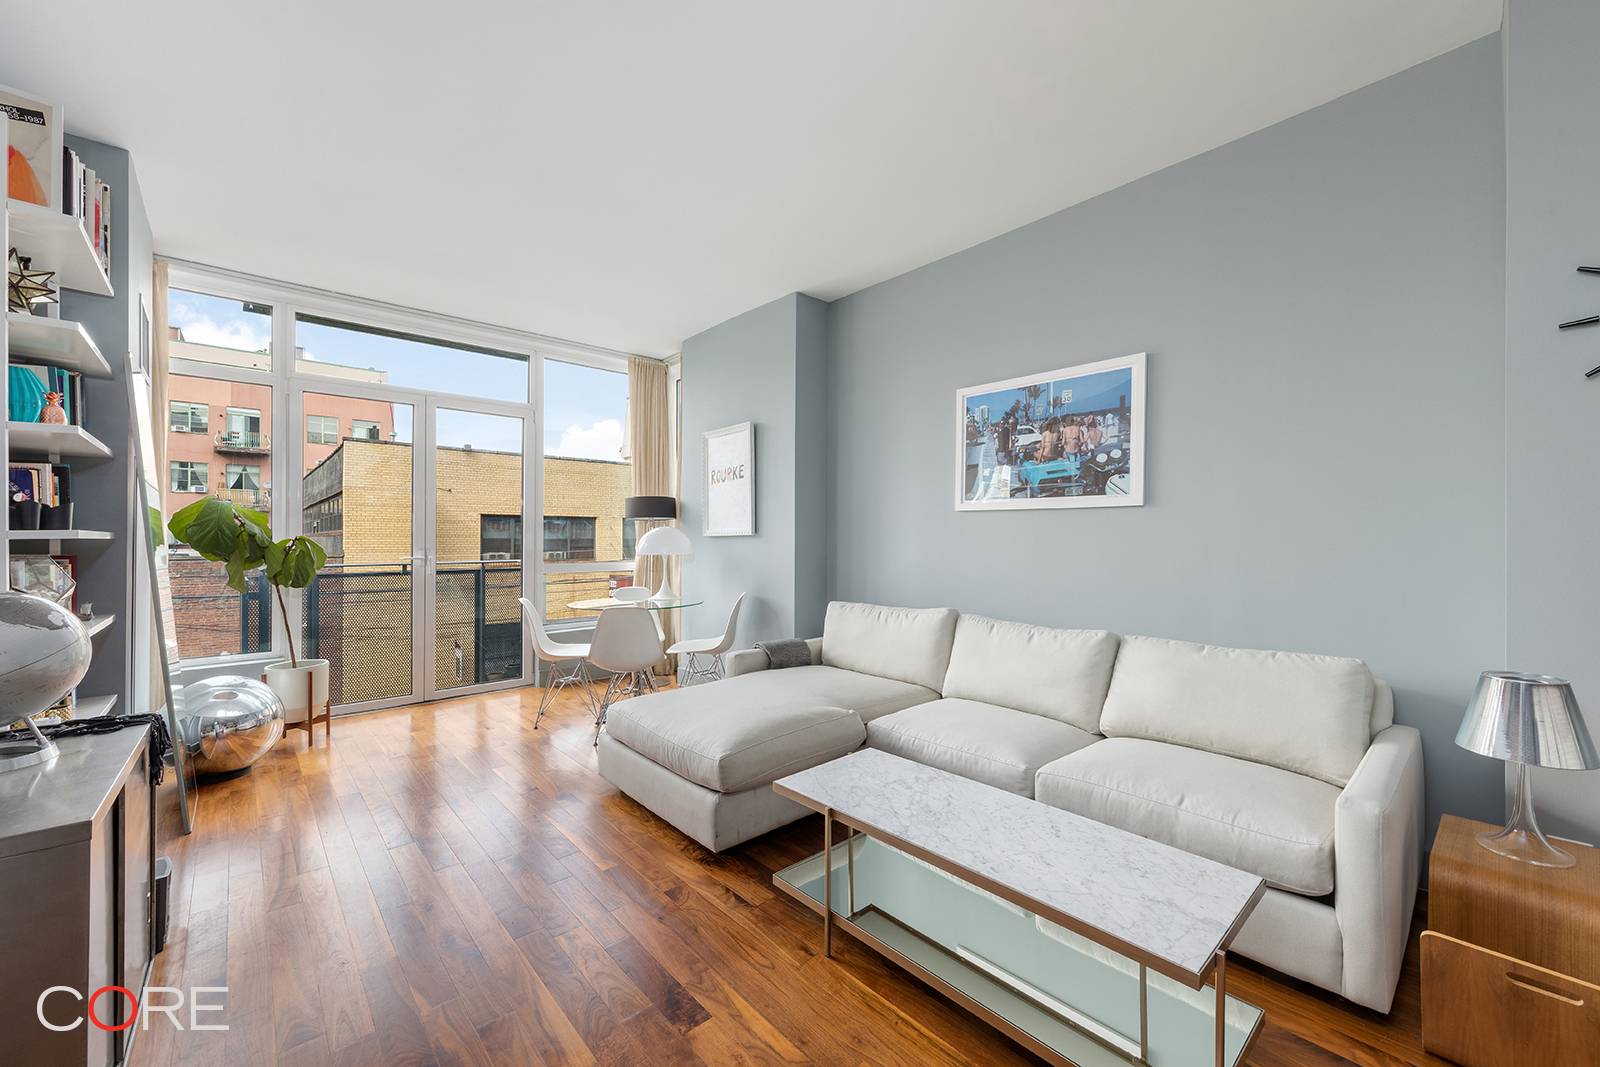 Idyllic one bedroom in the heart of Williamsburg with floor to ceiling windows and a French balcony.